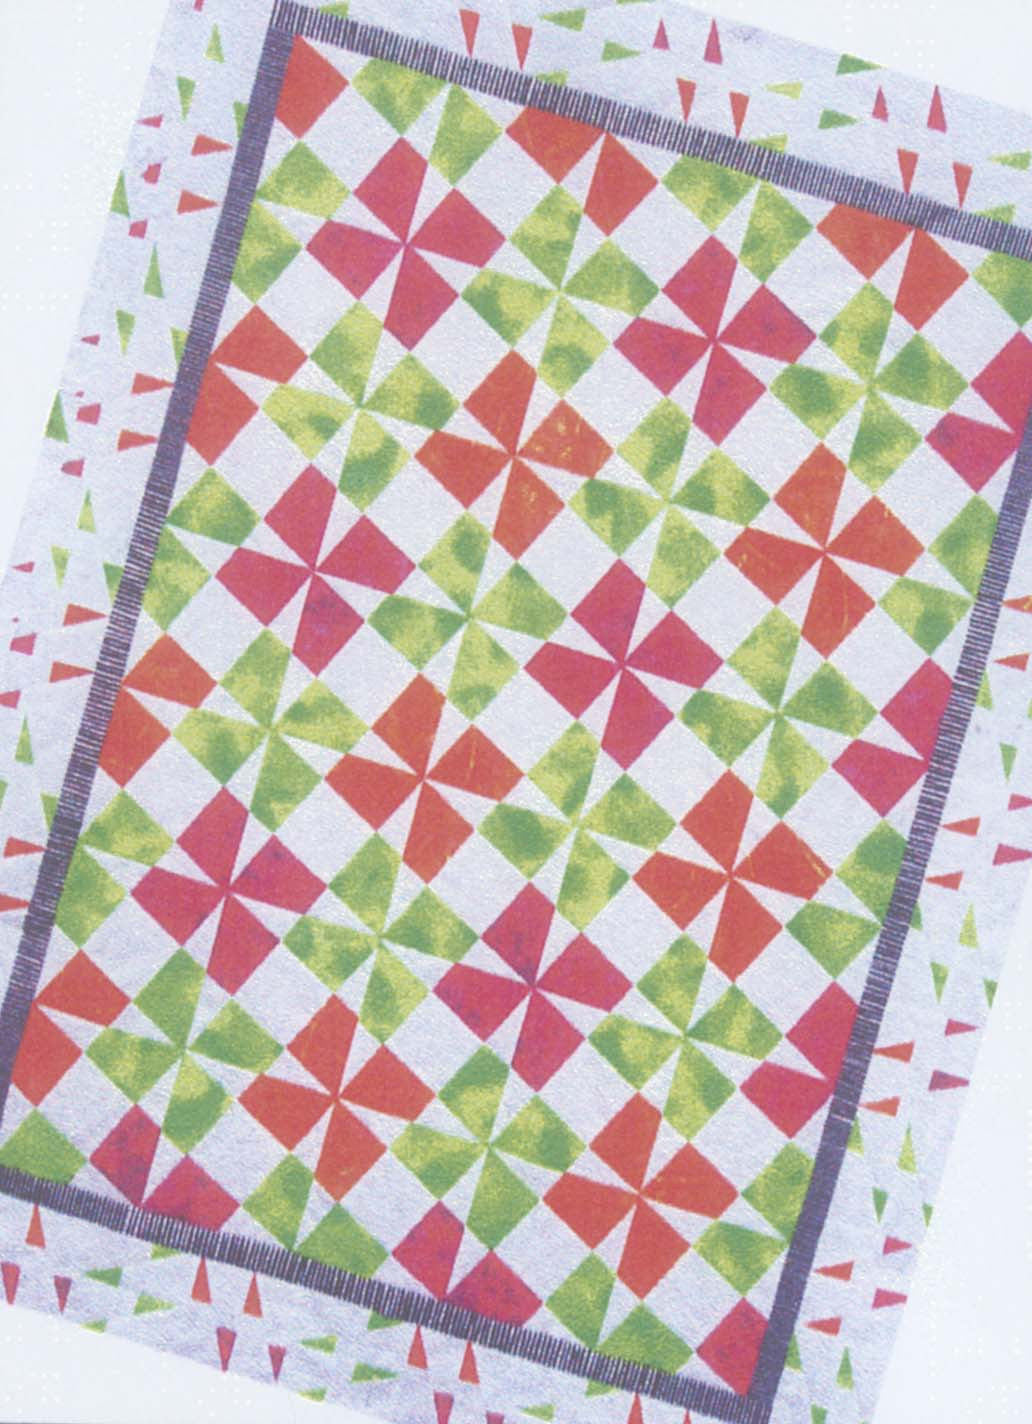 Pocketful Of Posies Quilt Pattern by Patricia Pepe for Cactus Queen Quilt Co.